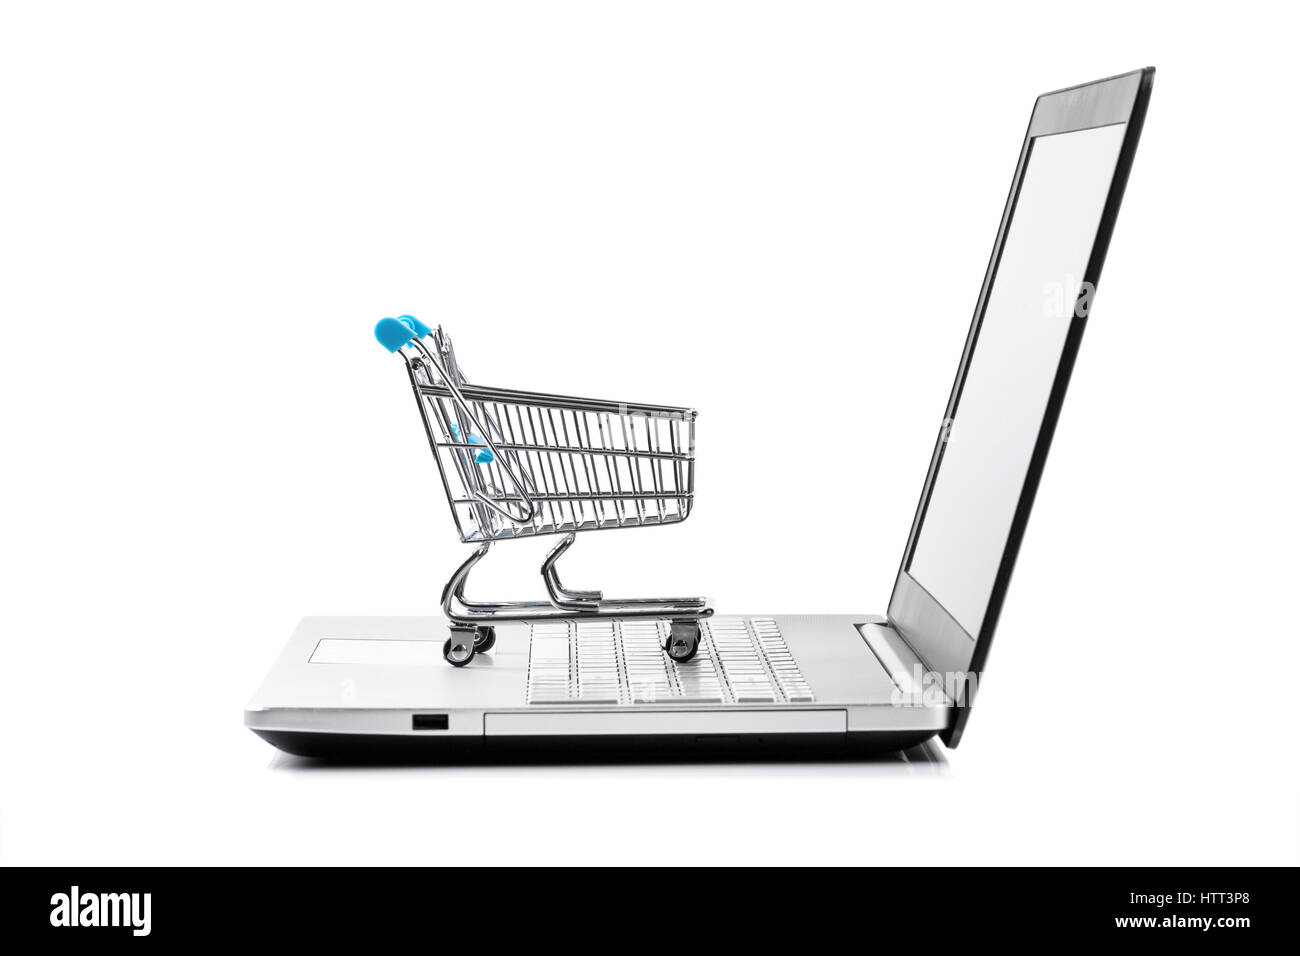 internet store concept - shopping cart on laptop keyboard Stock Photo